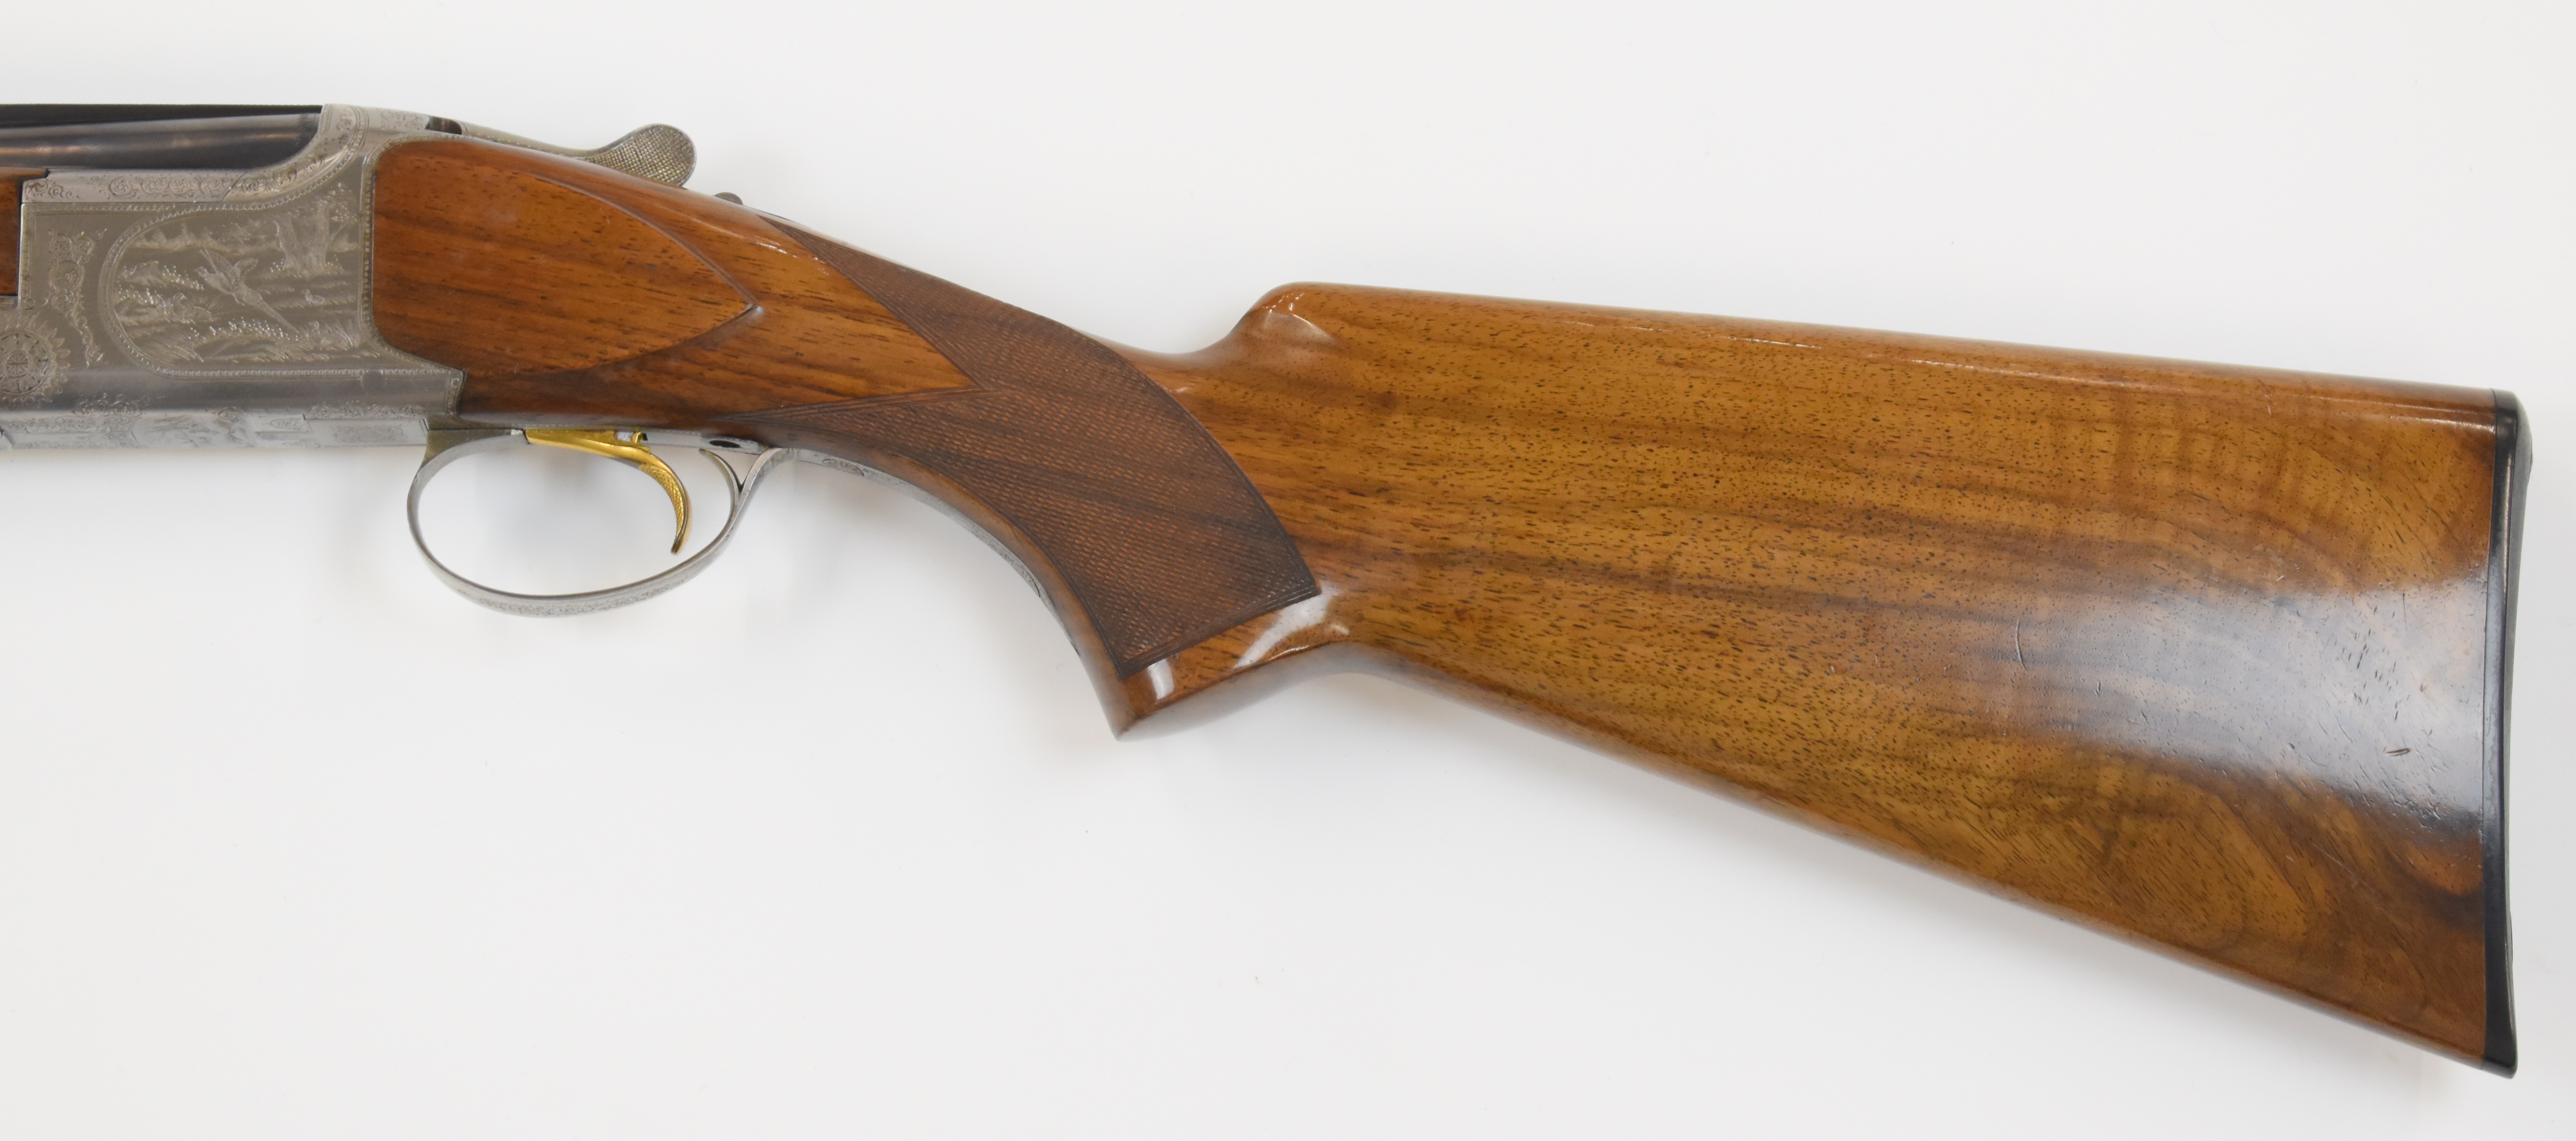 Browning B2 12 bore over and under shotgun with engraved scenes of birds to the locks and underside, - Image 10 of 12